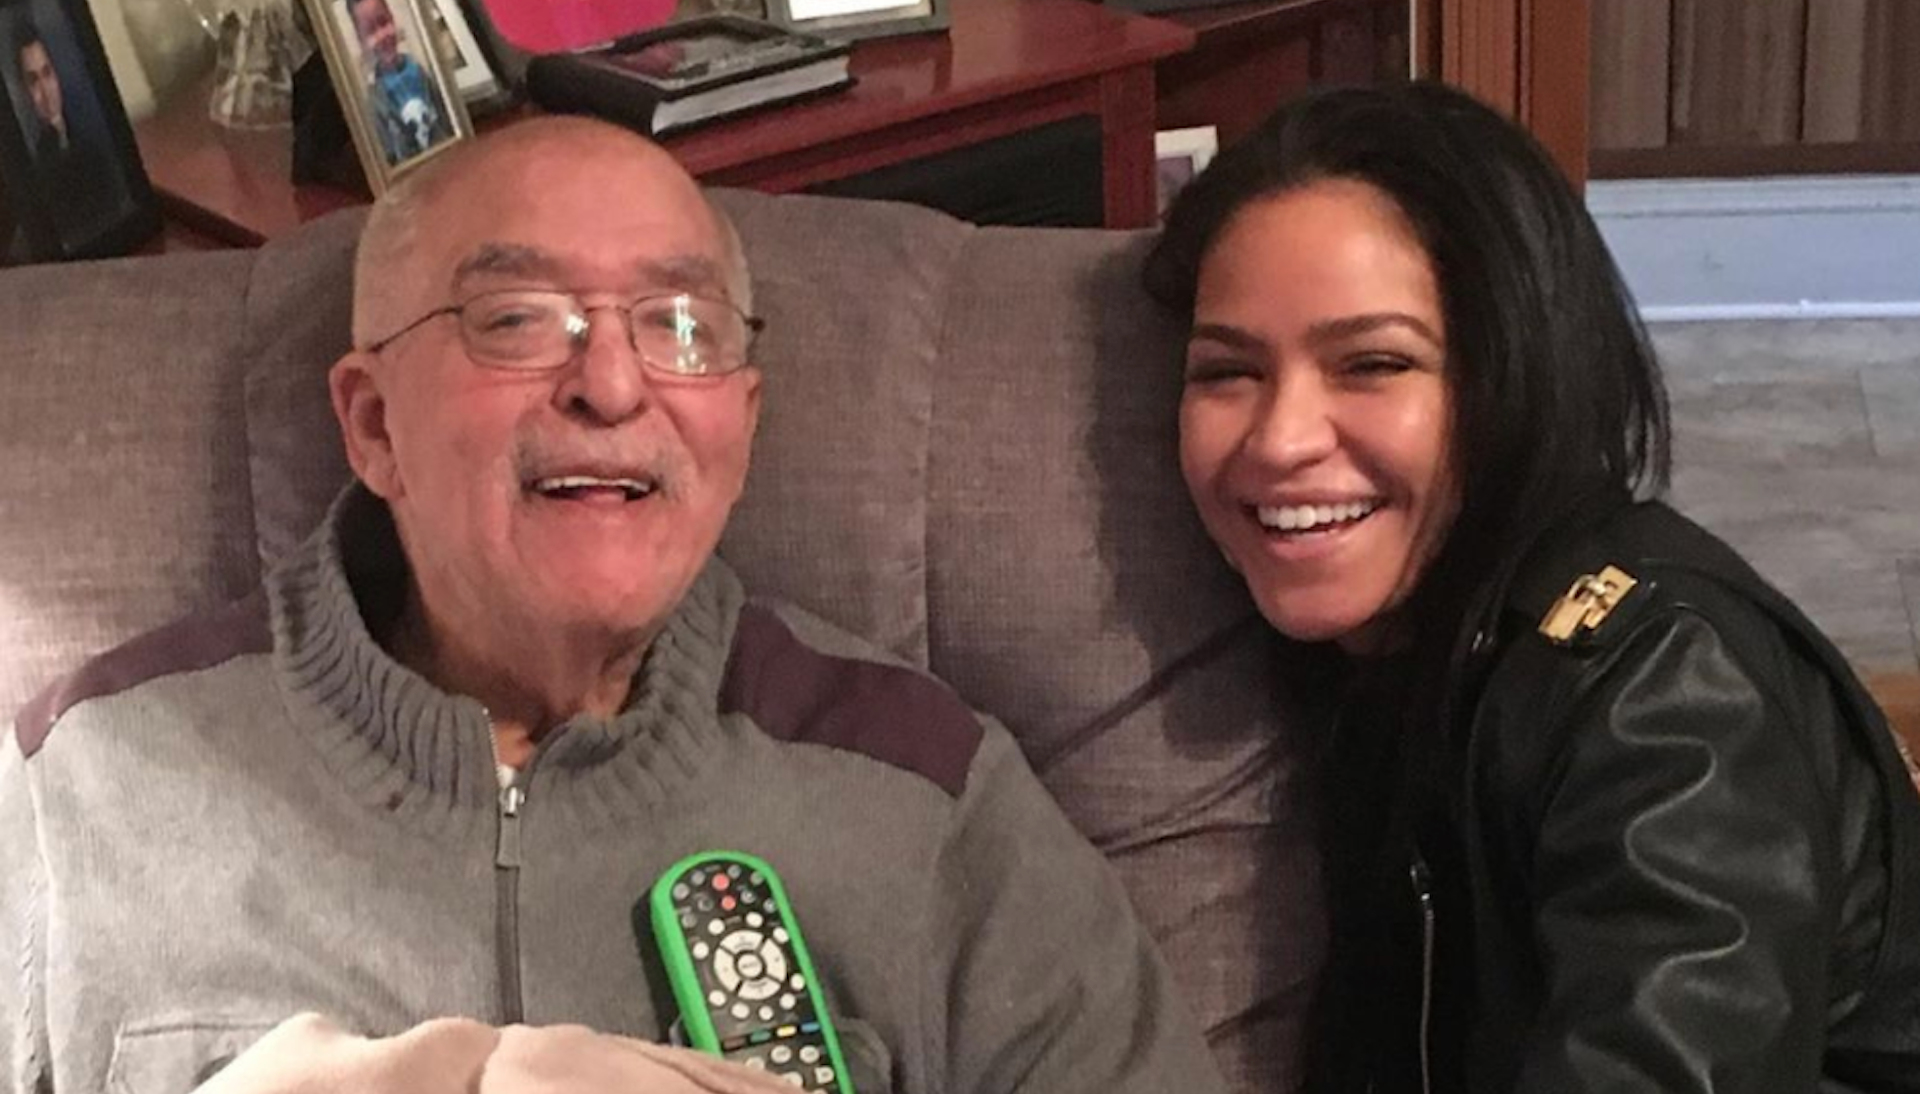 Cassie Mourns Grandfather's Death: 'I Wish I Could Hug You'